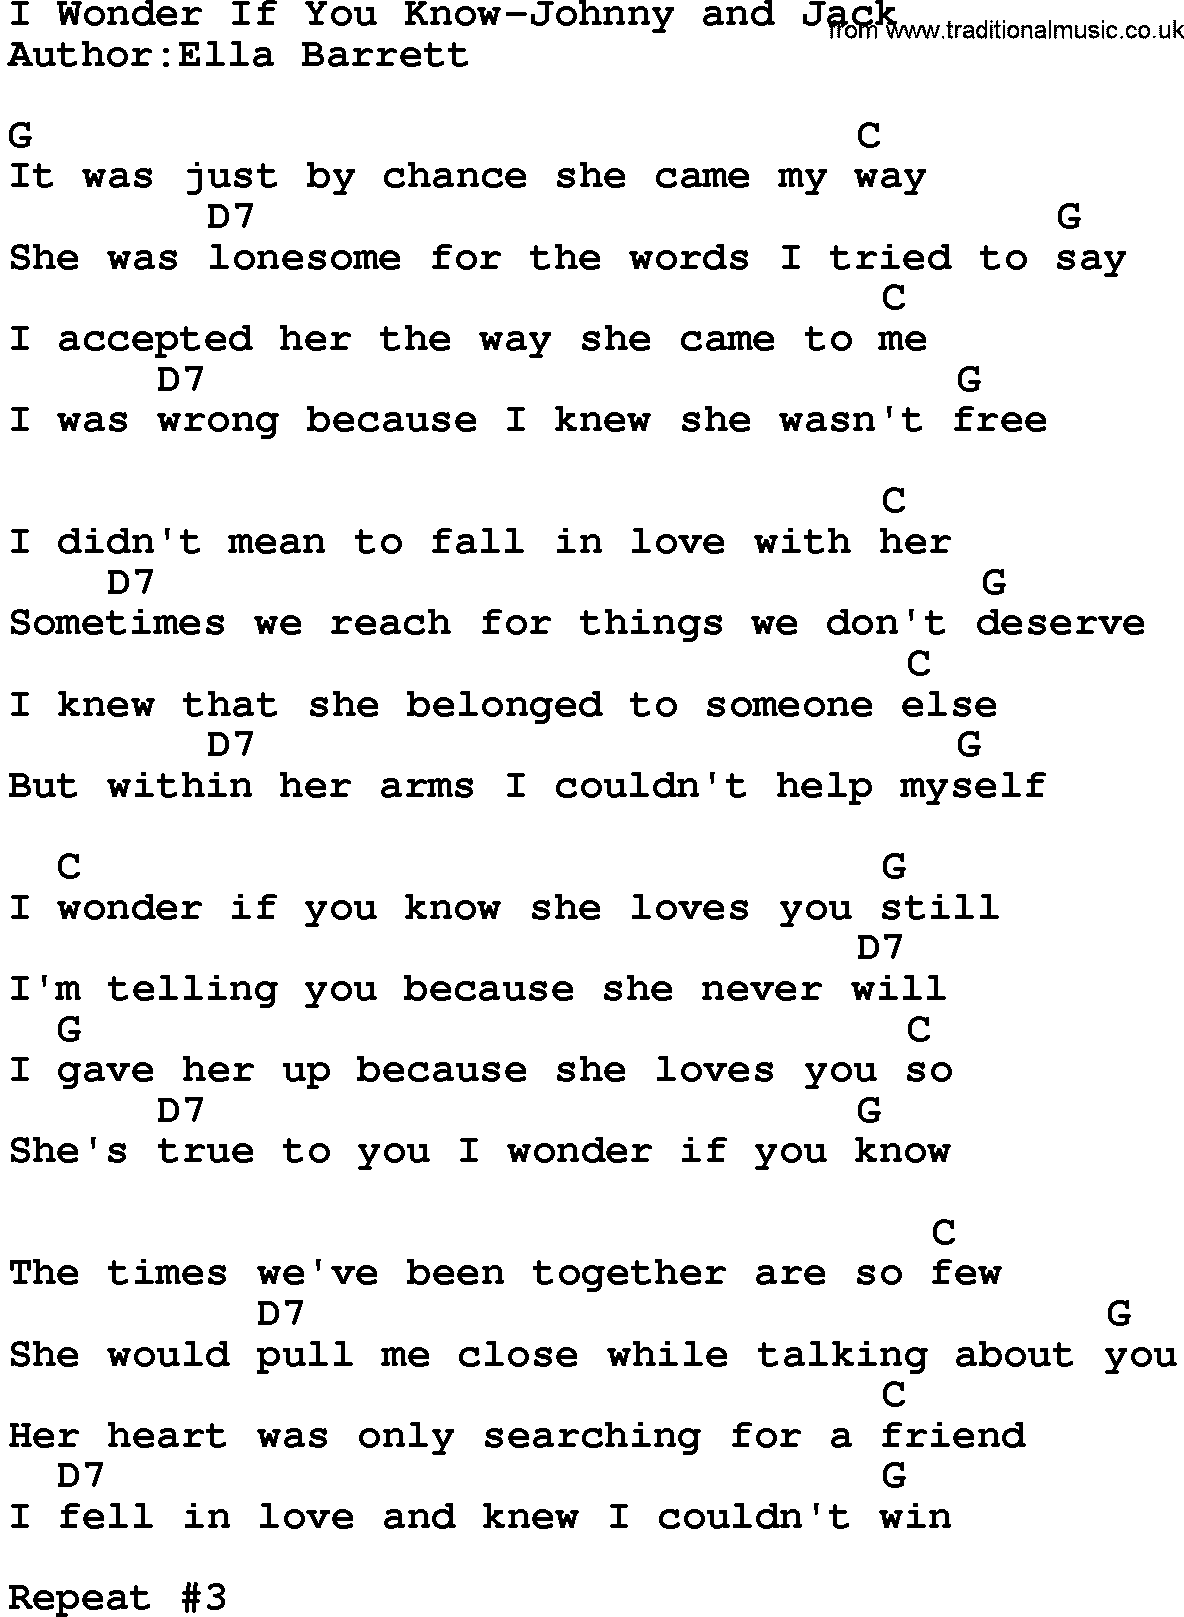 Country music song: I Wonder If You Know-Johnny And Jack lyrics and chords